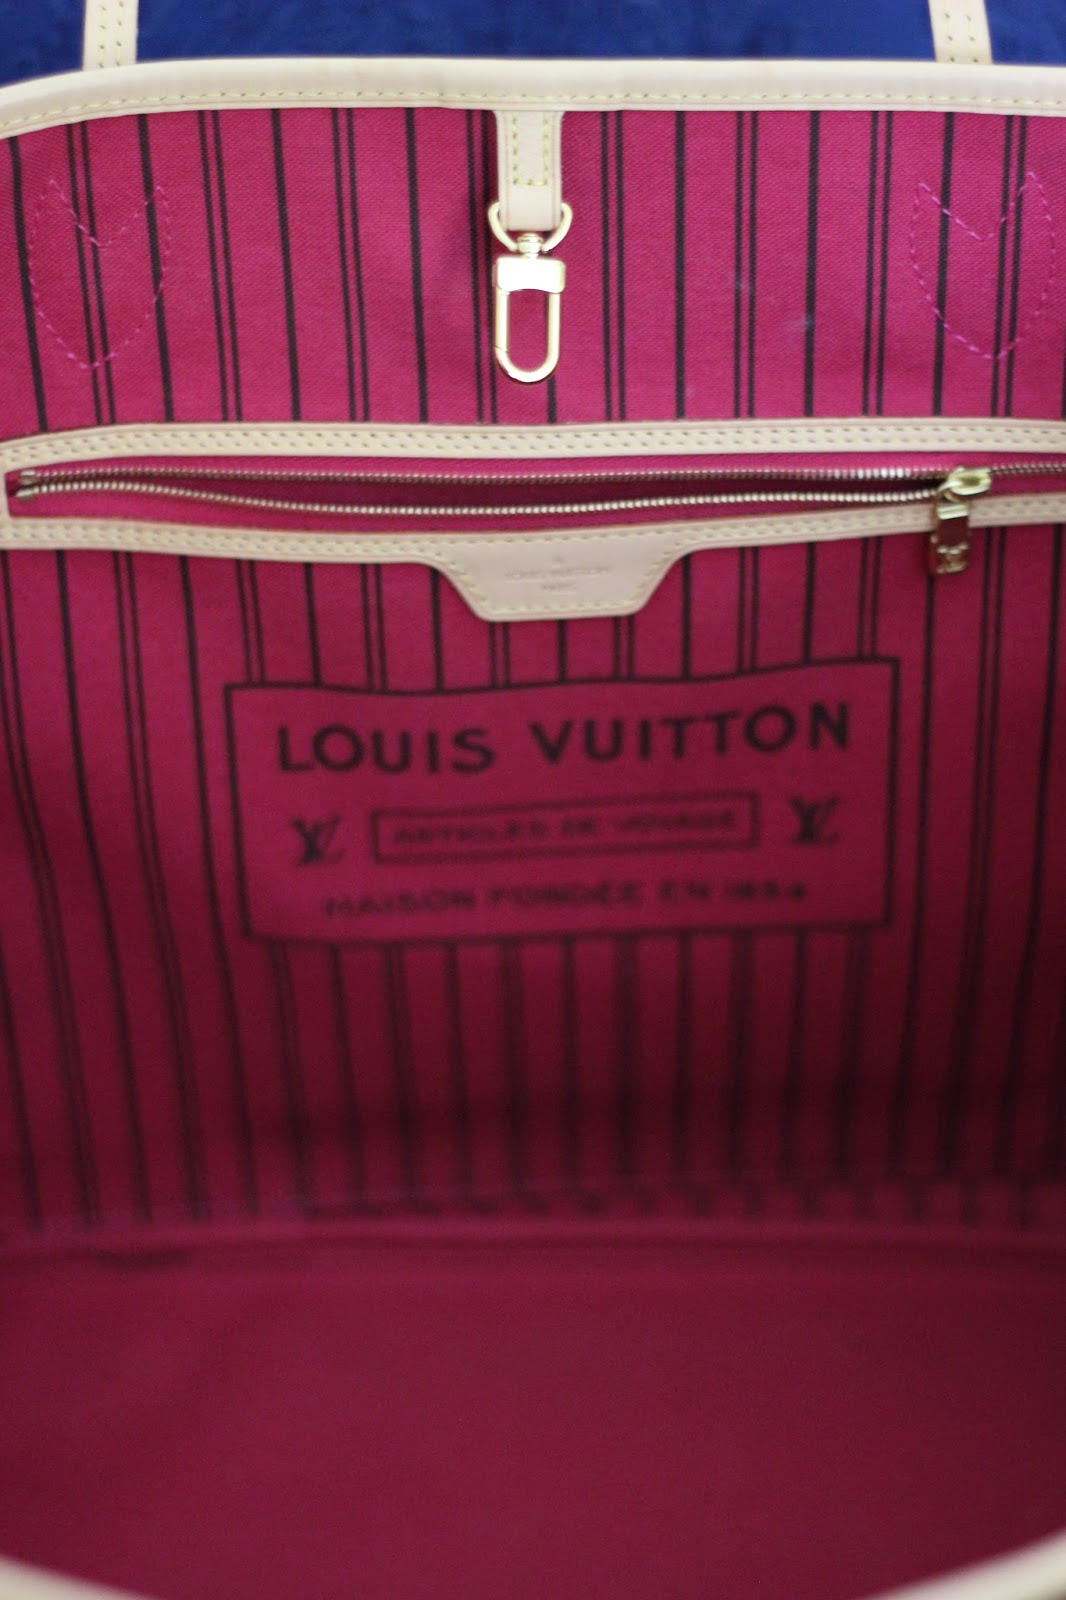 LOUIS VUITTON NEVERFULL MM REVIEW, PRICE INCREASE